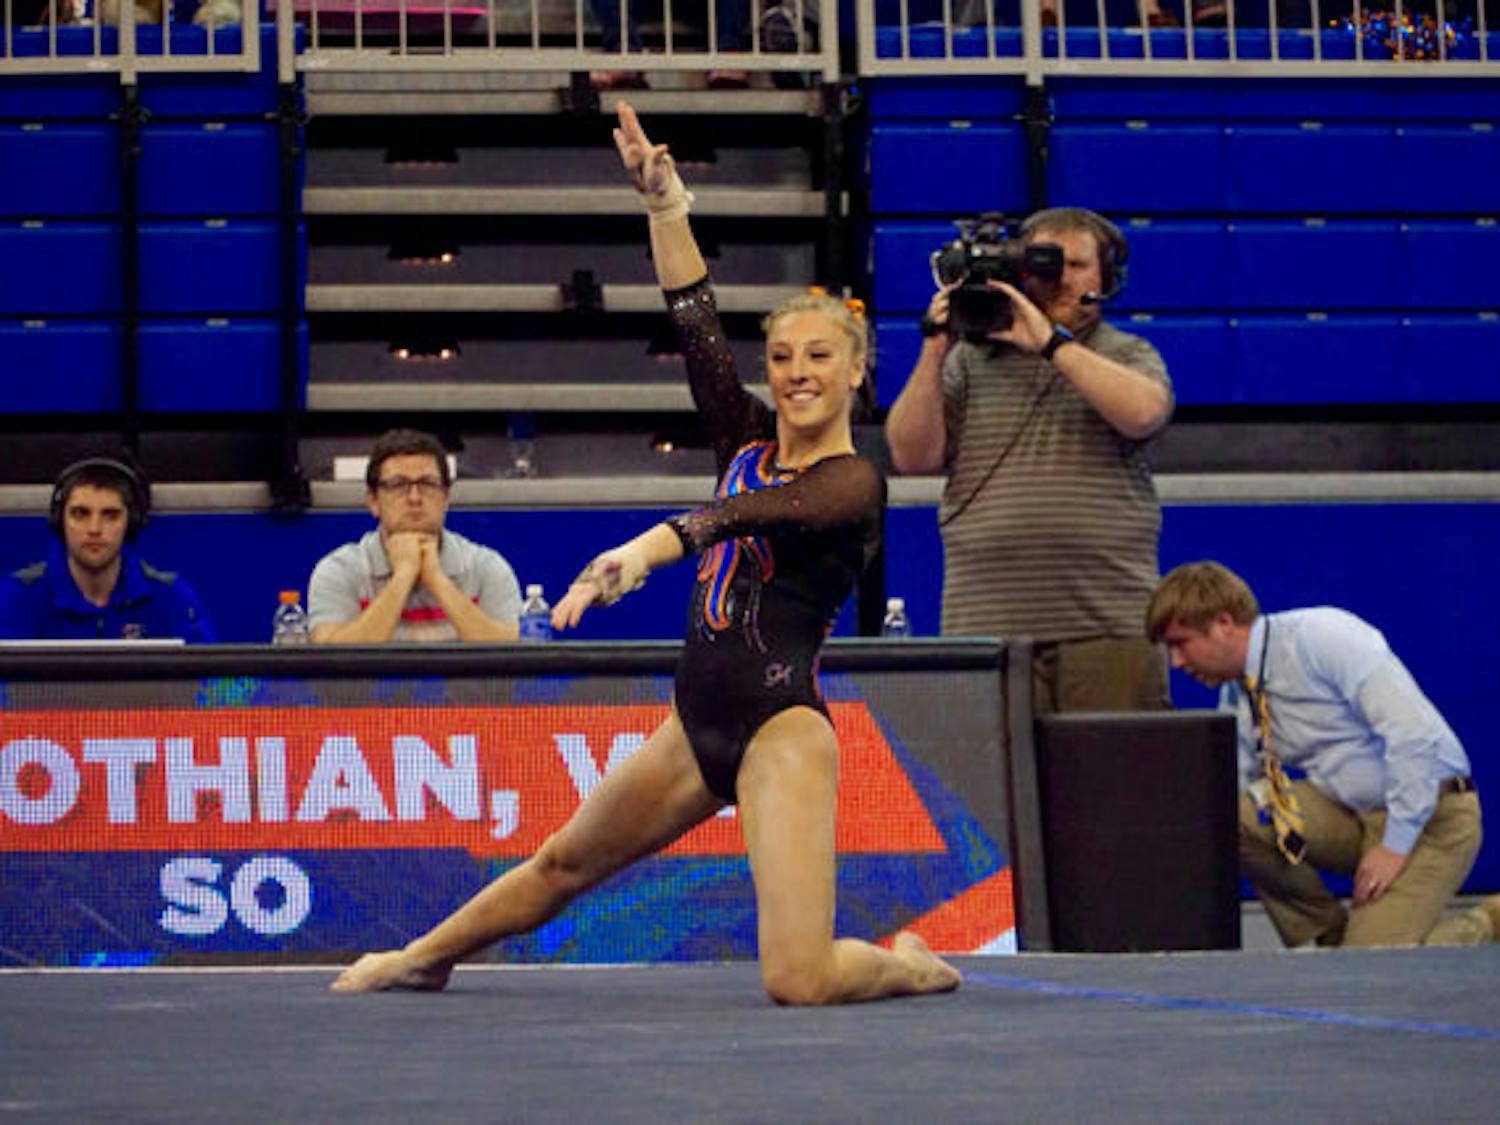 Alex McMurtry performs her floor routine during Florida's loss to LSU on Feb. 26, 2016, in the O'Connell Center.